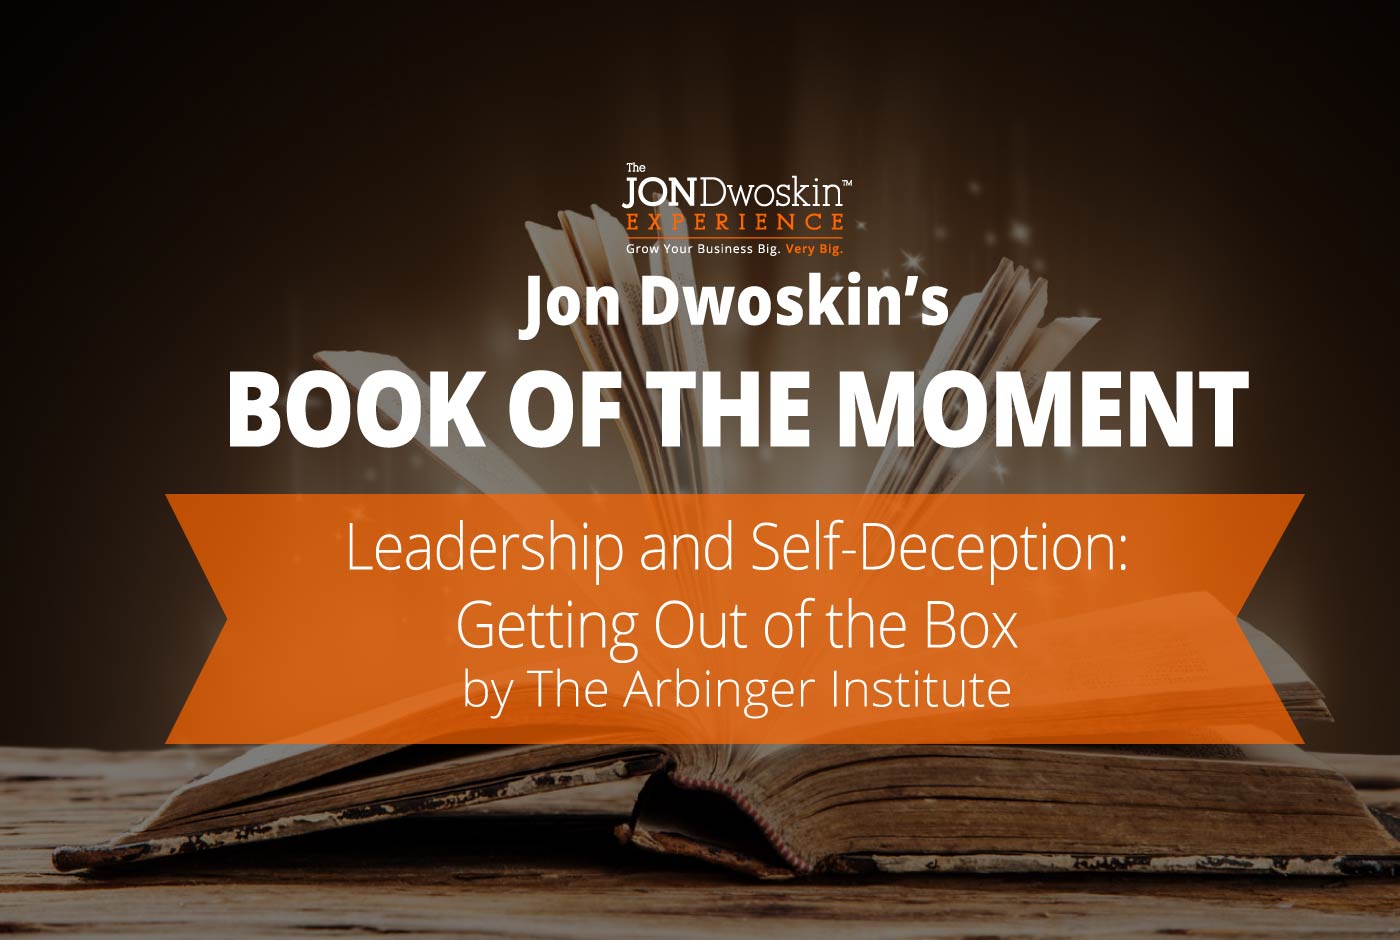 Jon Dwoskin's Book of the Month: Leadership and Self-Deception: Getting Out of the Box 